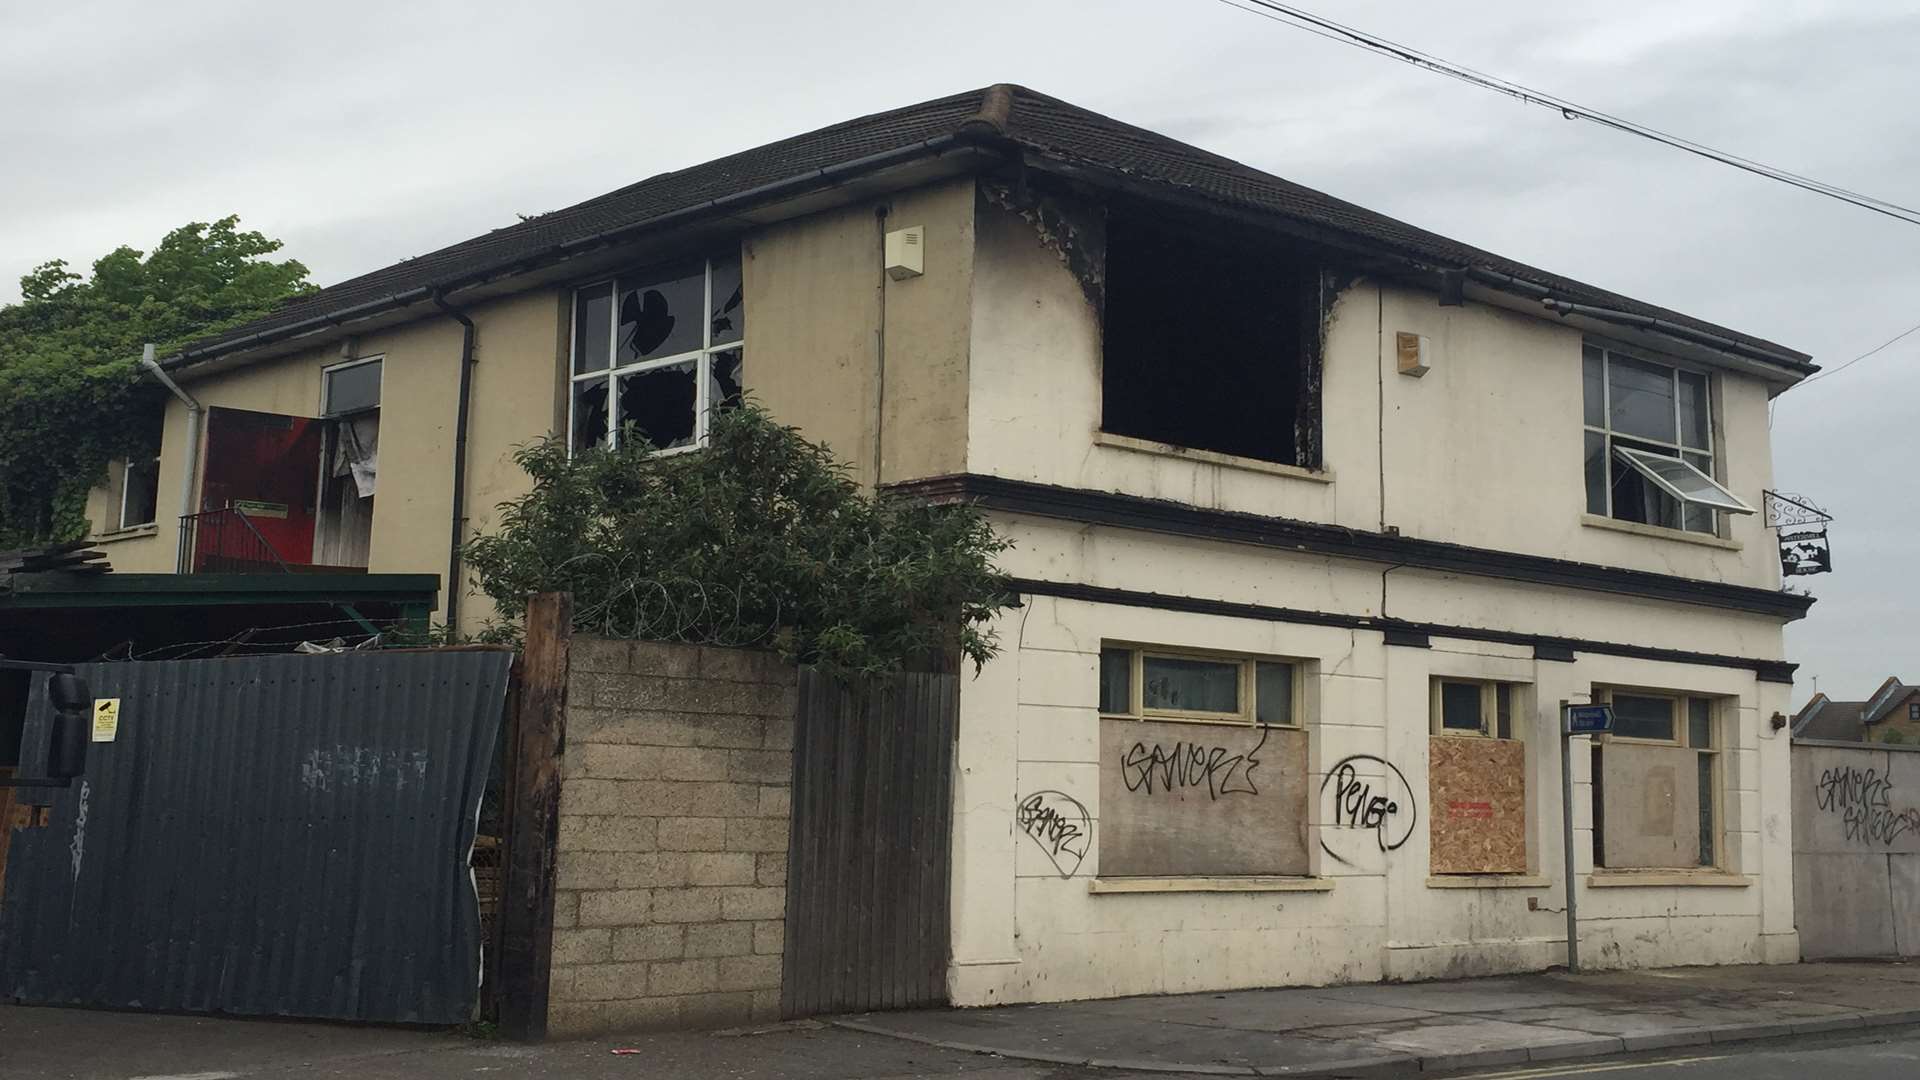 Fire at a derelict pub in canal Road, Strood